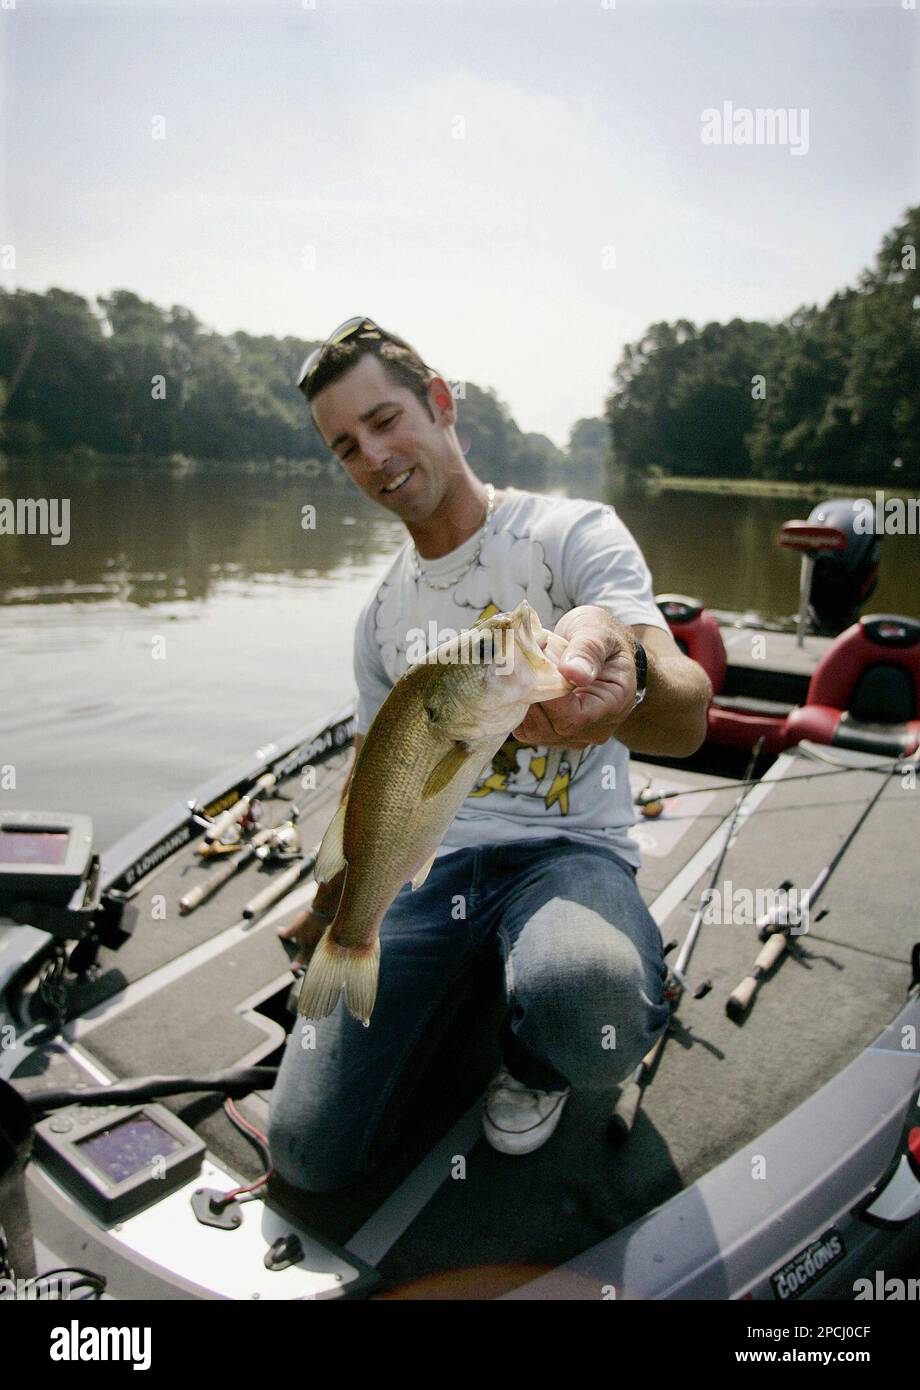 Mike Iaconelli is known to taunt fish, whoop and even break-dance